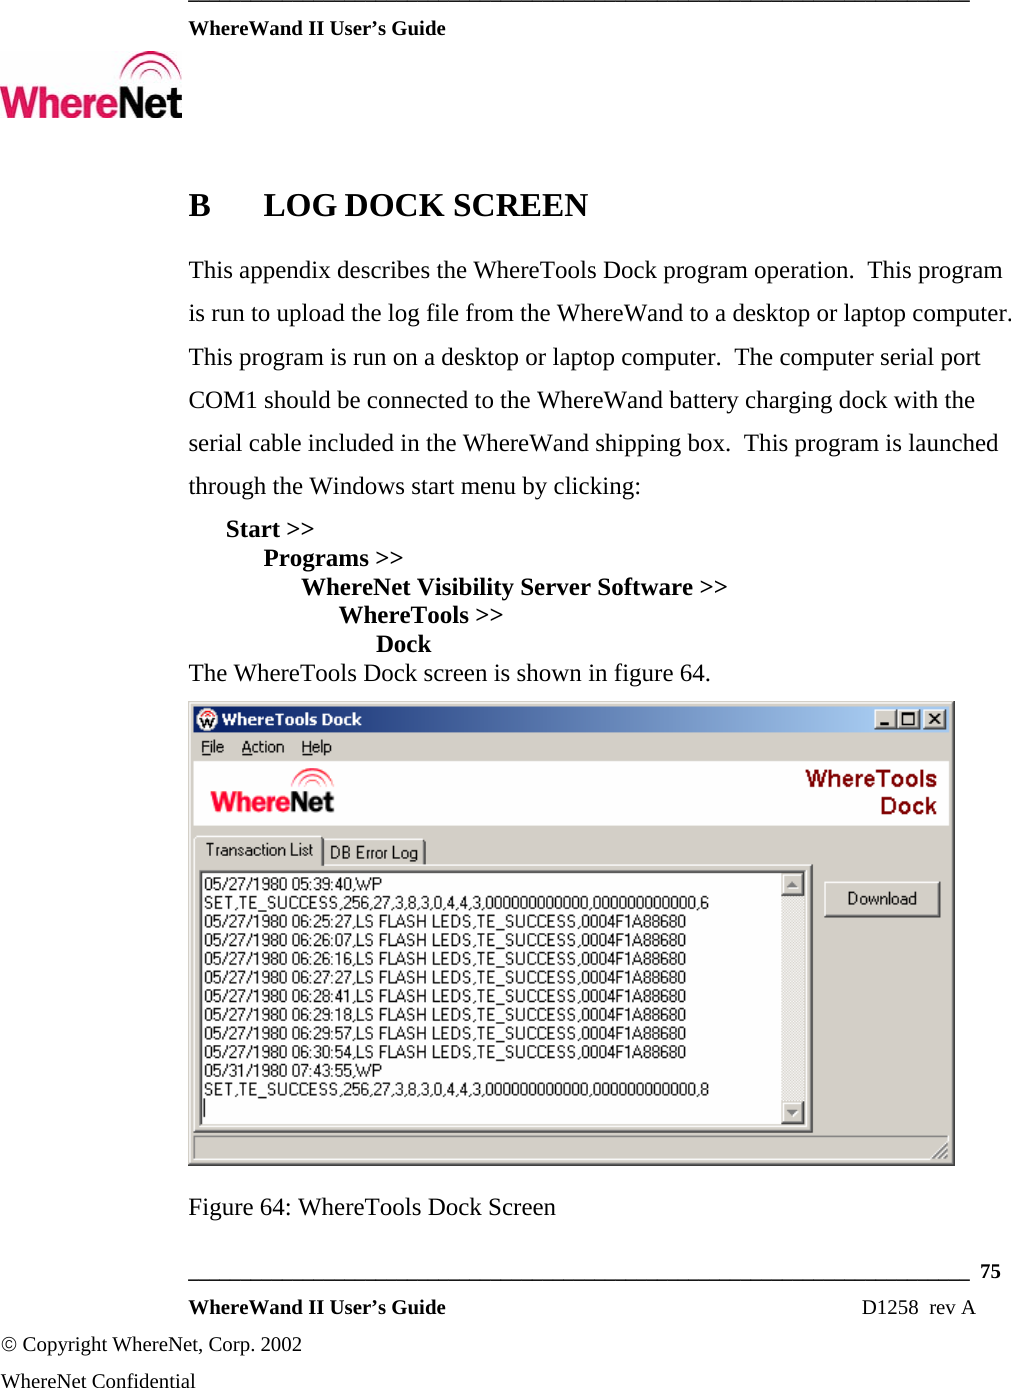  ___________________________________________________________________________  WhereWand II User’s Guide     ___________________________________________________________________________  75  WhereWand II User’s Guide                                                                          D1258  rev A © Copyright WhereNet, Corp. 2002  WhereNet Confidential B LOG DOCK SCREEN This appendix describes the WhereTools Dock program operation.  This program is run to upload the log file from the WhereWand to a desktop or laptop computer.  This program is run on a desktop or laptop computer.  The computer serial port COM1 should be connected to the WhereWand battery charging dock with the serial cable included in the WhereWand shipping box.  This program is launched through the Windows start menu by clicking:  Start &gt;&gt;   Programs &gt;&gt;    WhereNet Visibility Server Software &gt;&gt;     WhereTools &gt;&gt;      Dock The WhereTools Dock screen is shown in figure 64.  Figure 64: WhereTools Dock Screen 